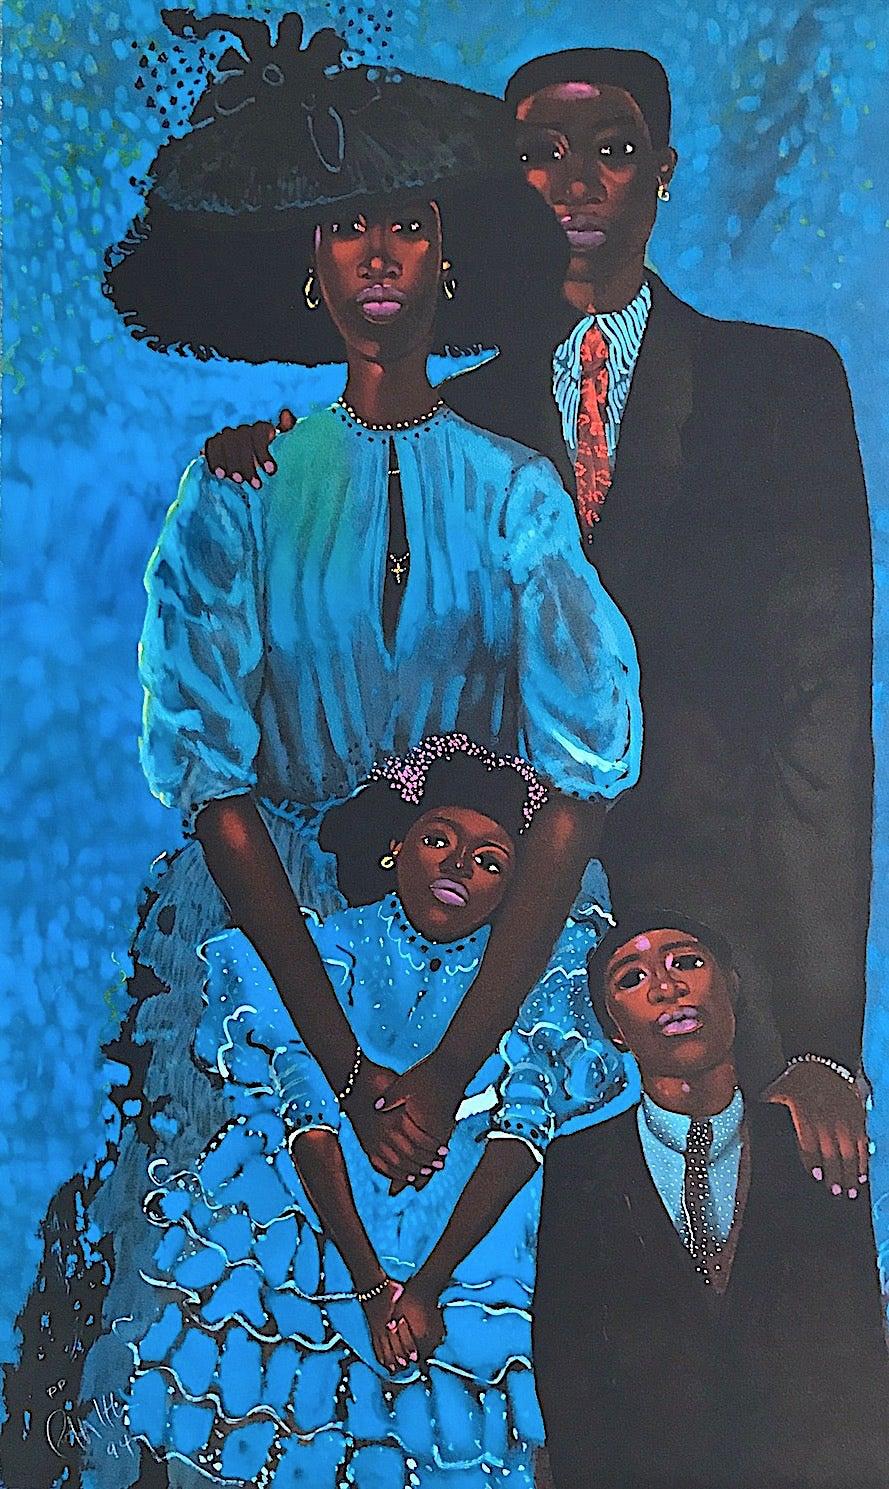 Geoffrey Holder Figurative Print - FAMILY IN BLUE Signed Lithograph, Black Family Portrait, Azure Blue, Warm Brown